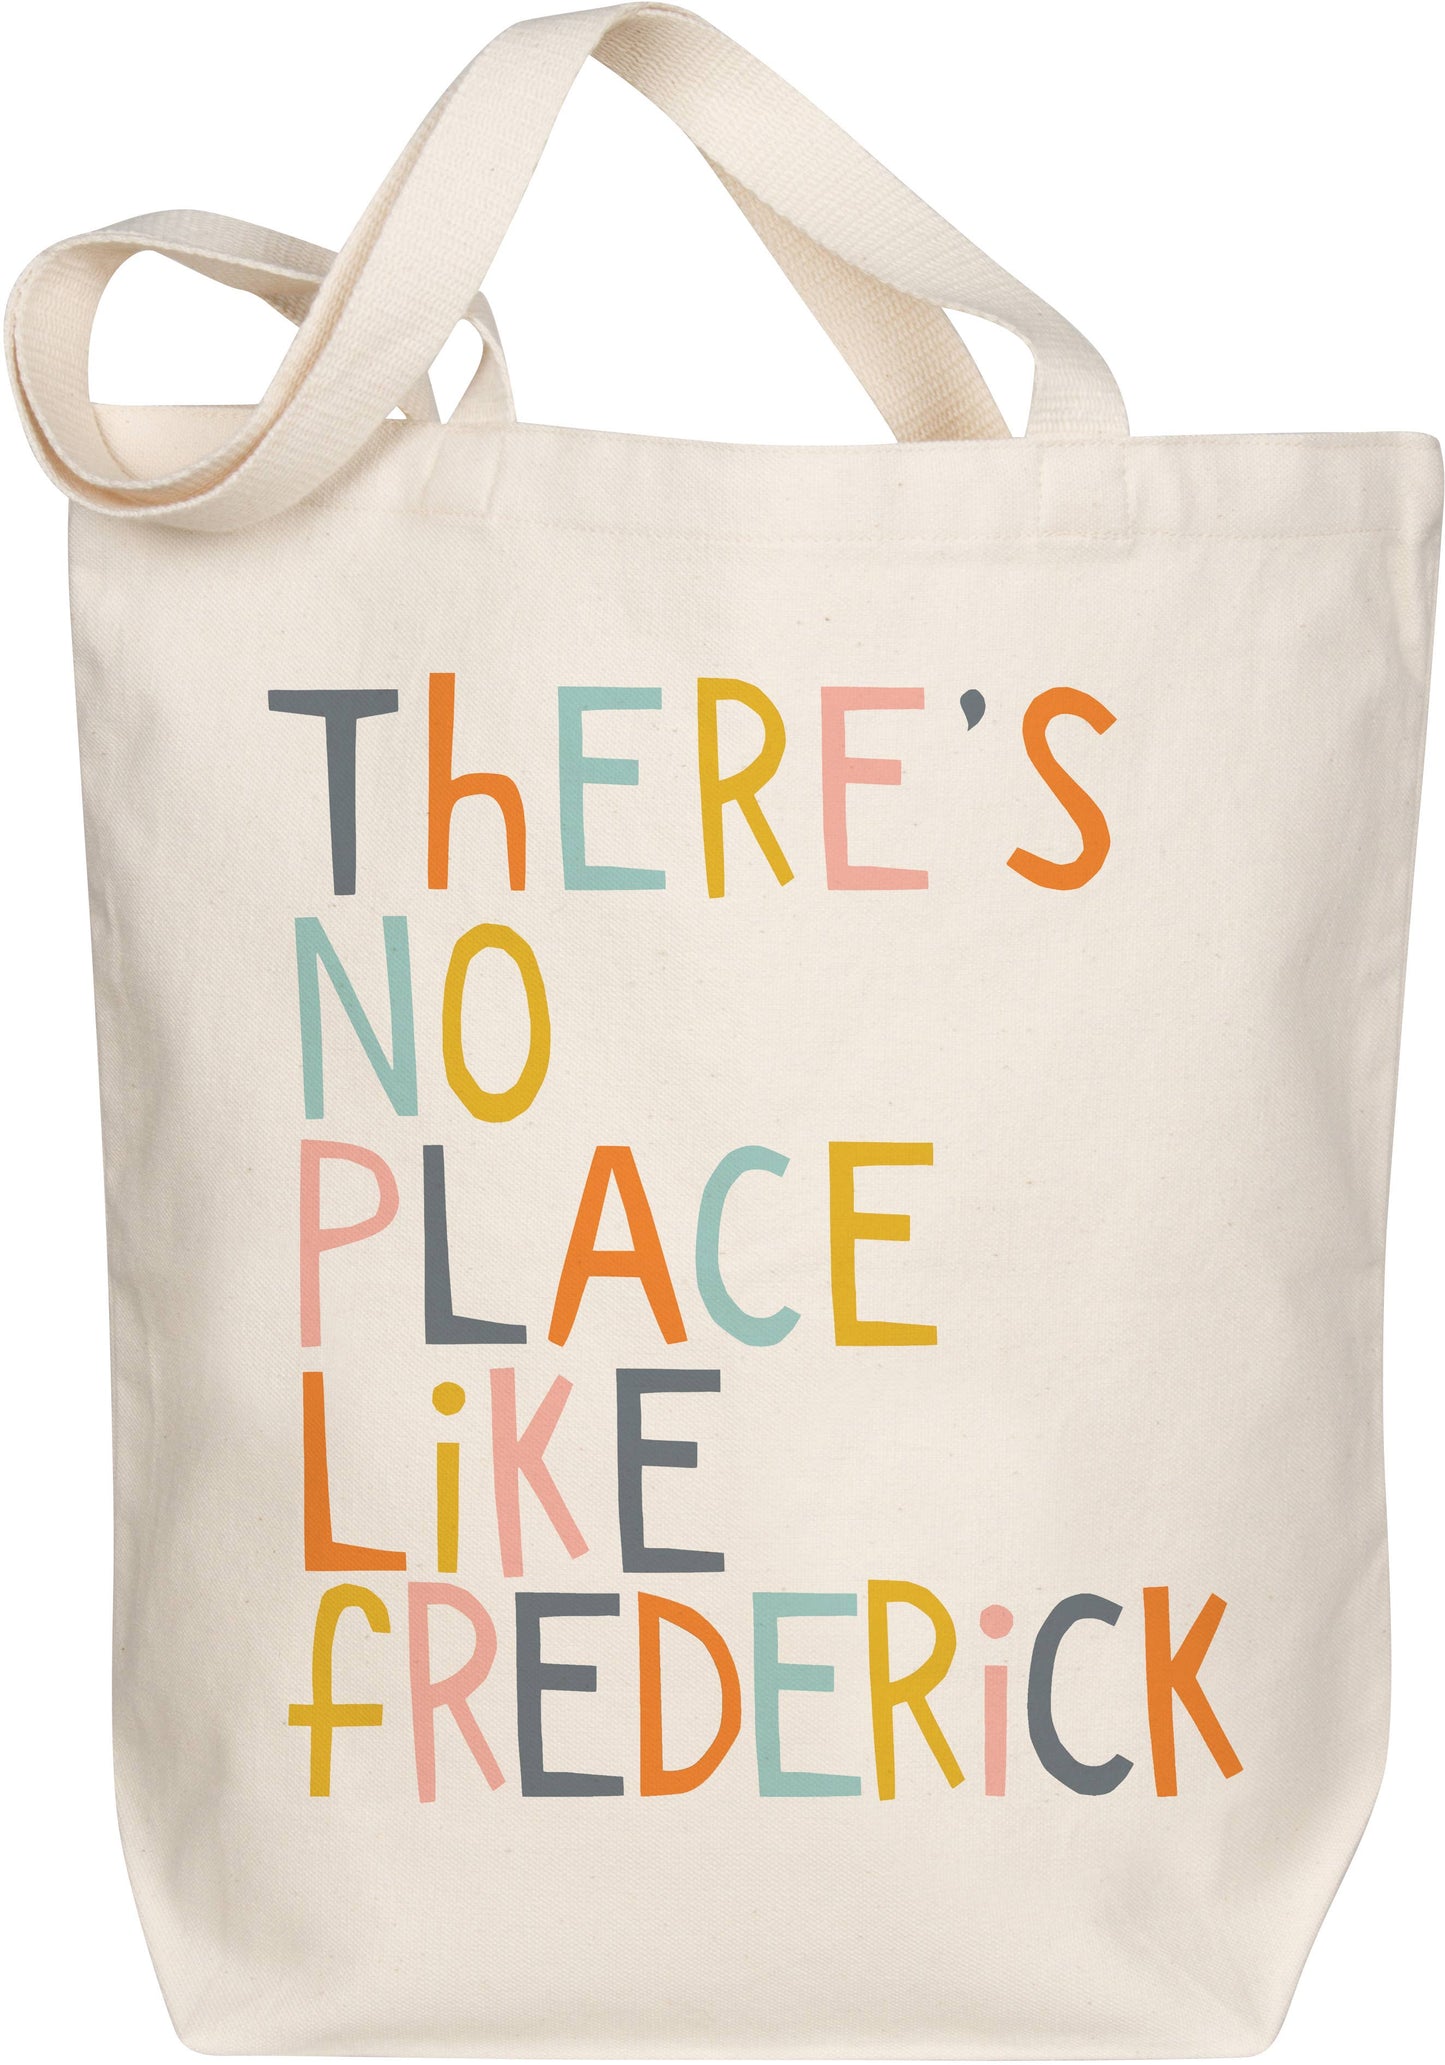 No Place Like Frederick Tote